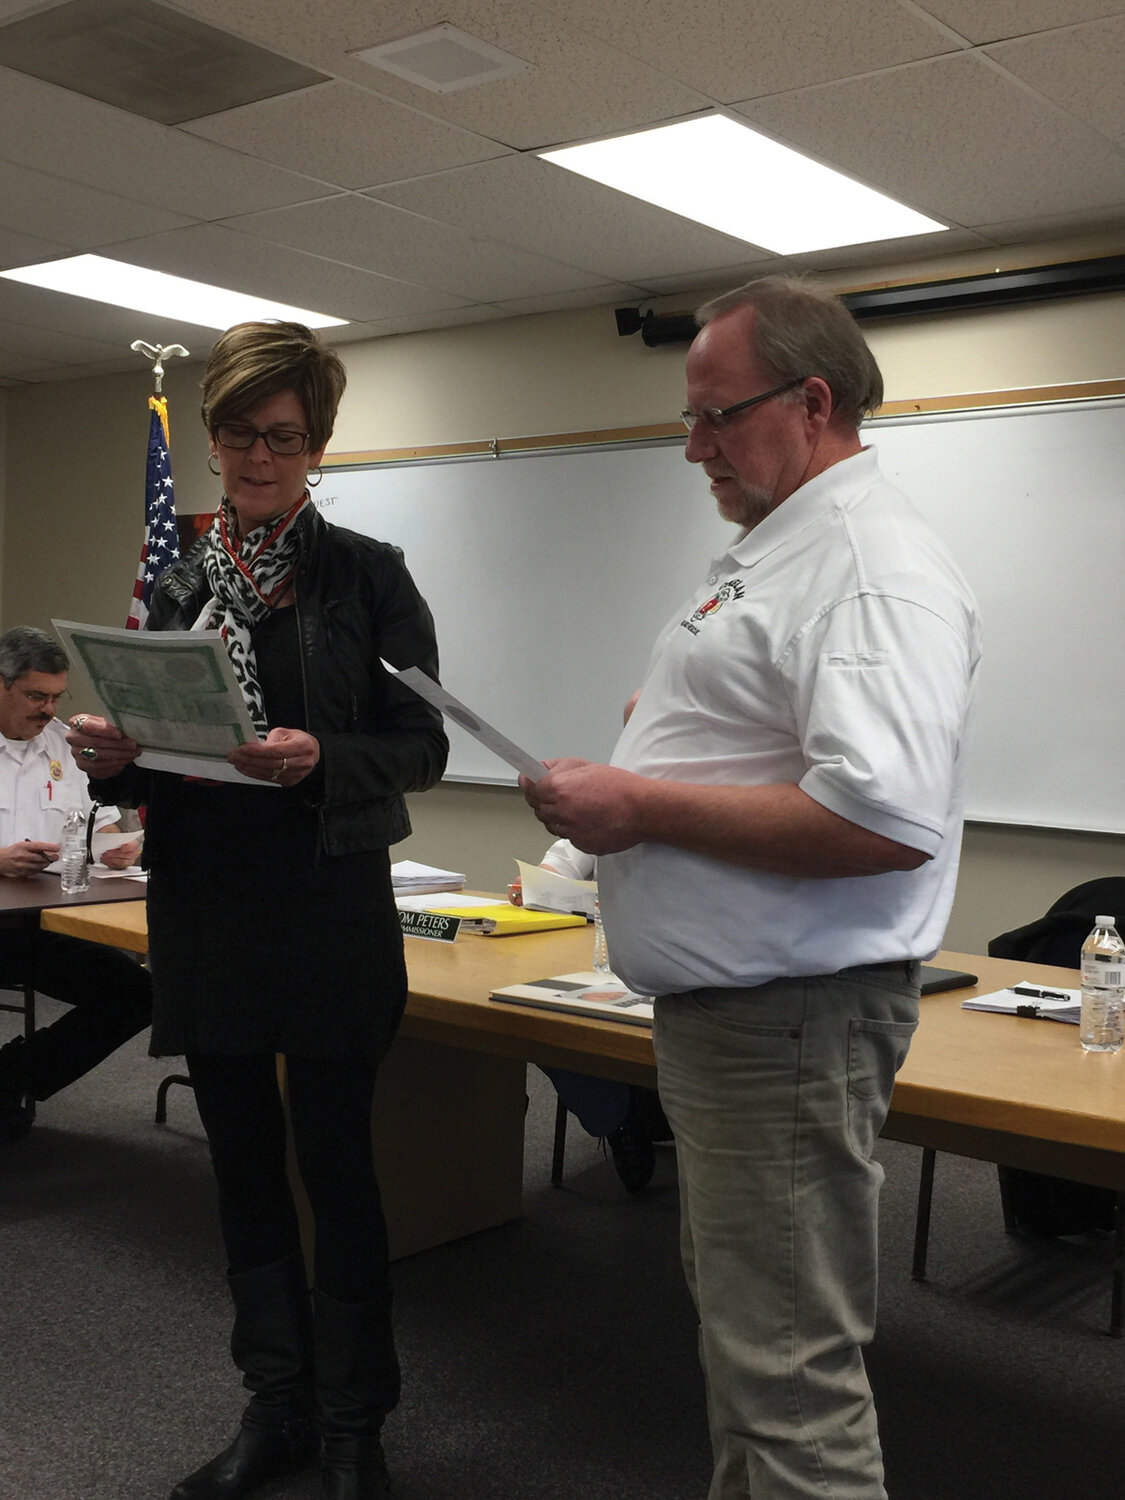 CFR 7 Administrative Office Manager Carol Kibler guides Phil Moller through the Oath of Office speech necessary to solidify his position as commissioner.